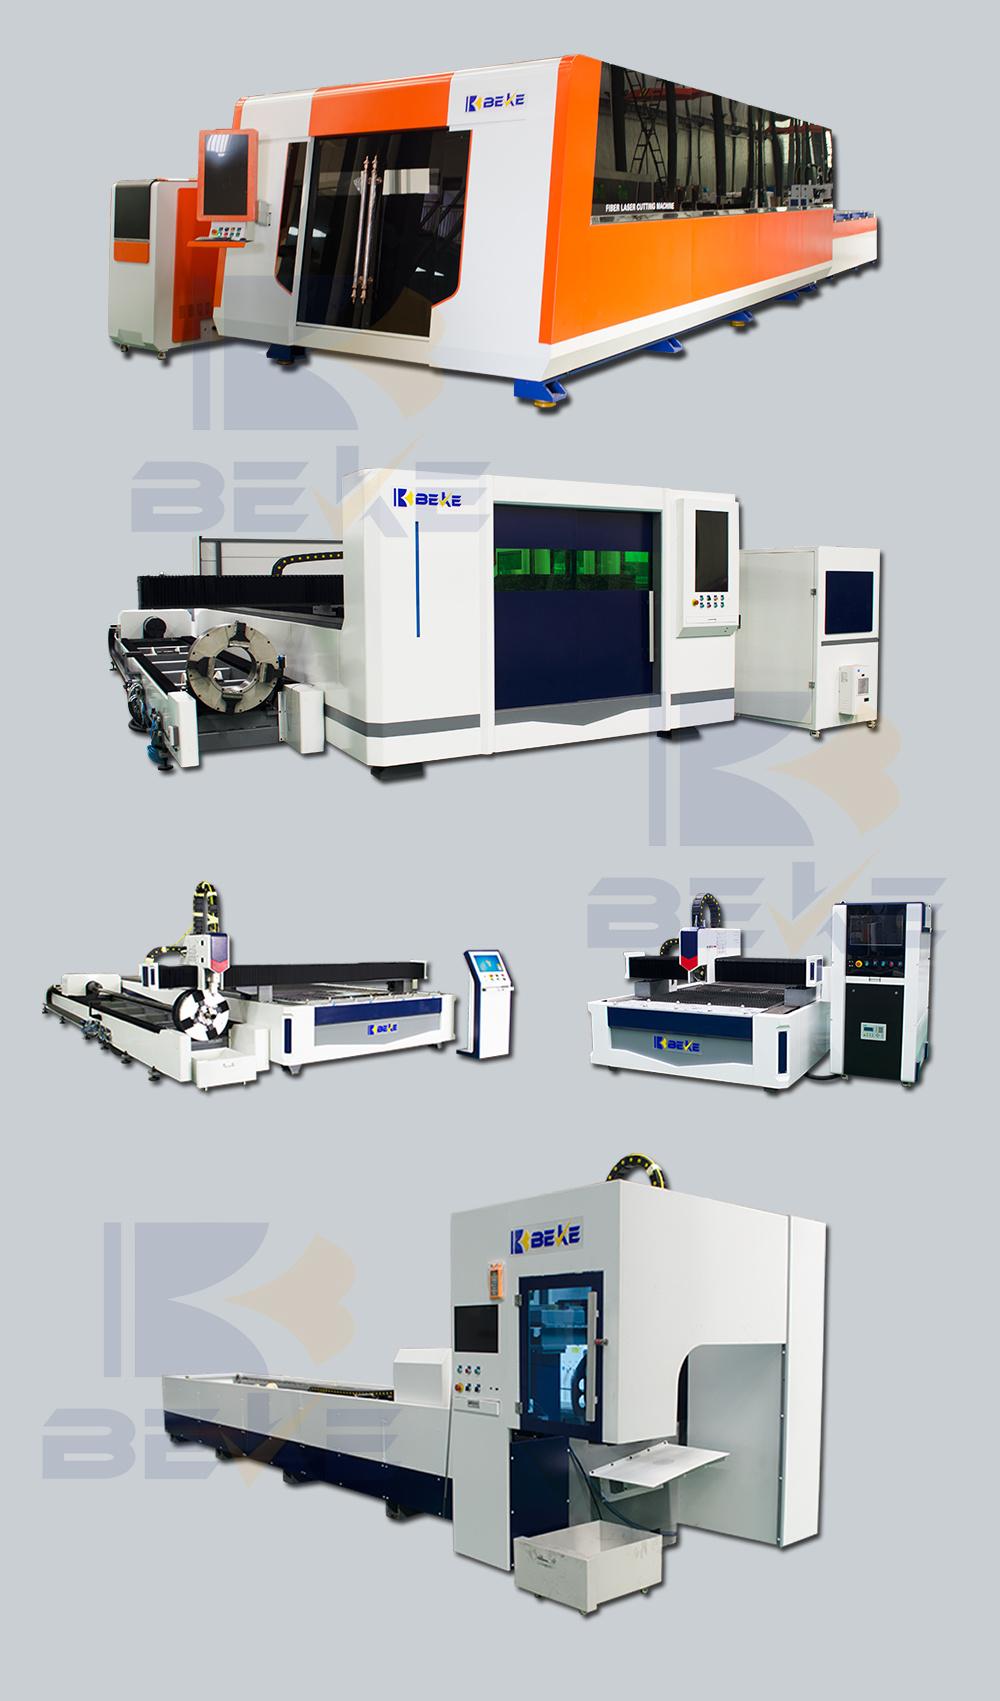 Bk 6012 Stainless Steel Sheet Tube CNC Fiber Laser Cutting Machine Factory Outlet